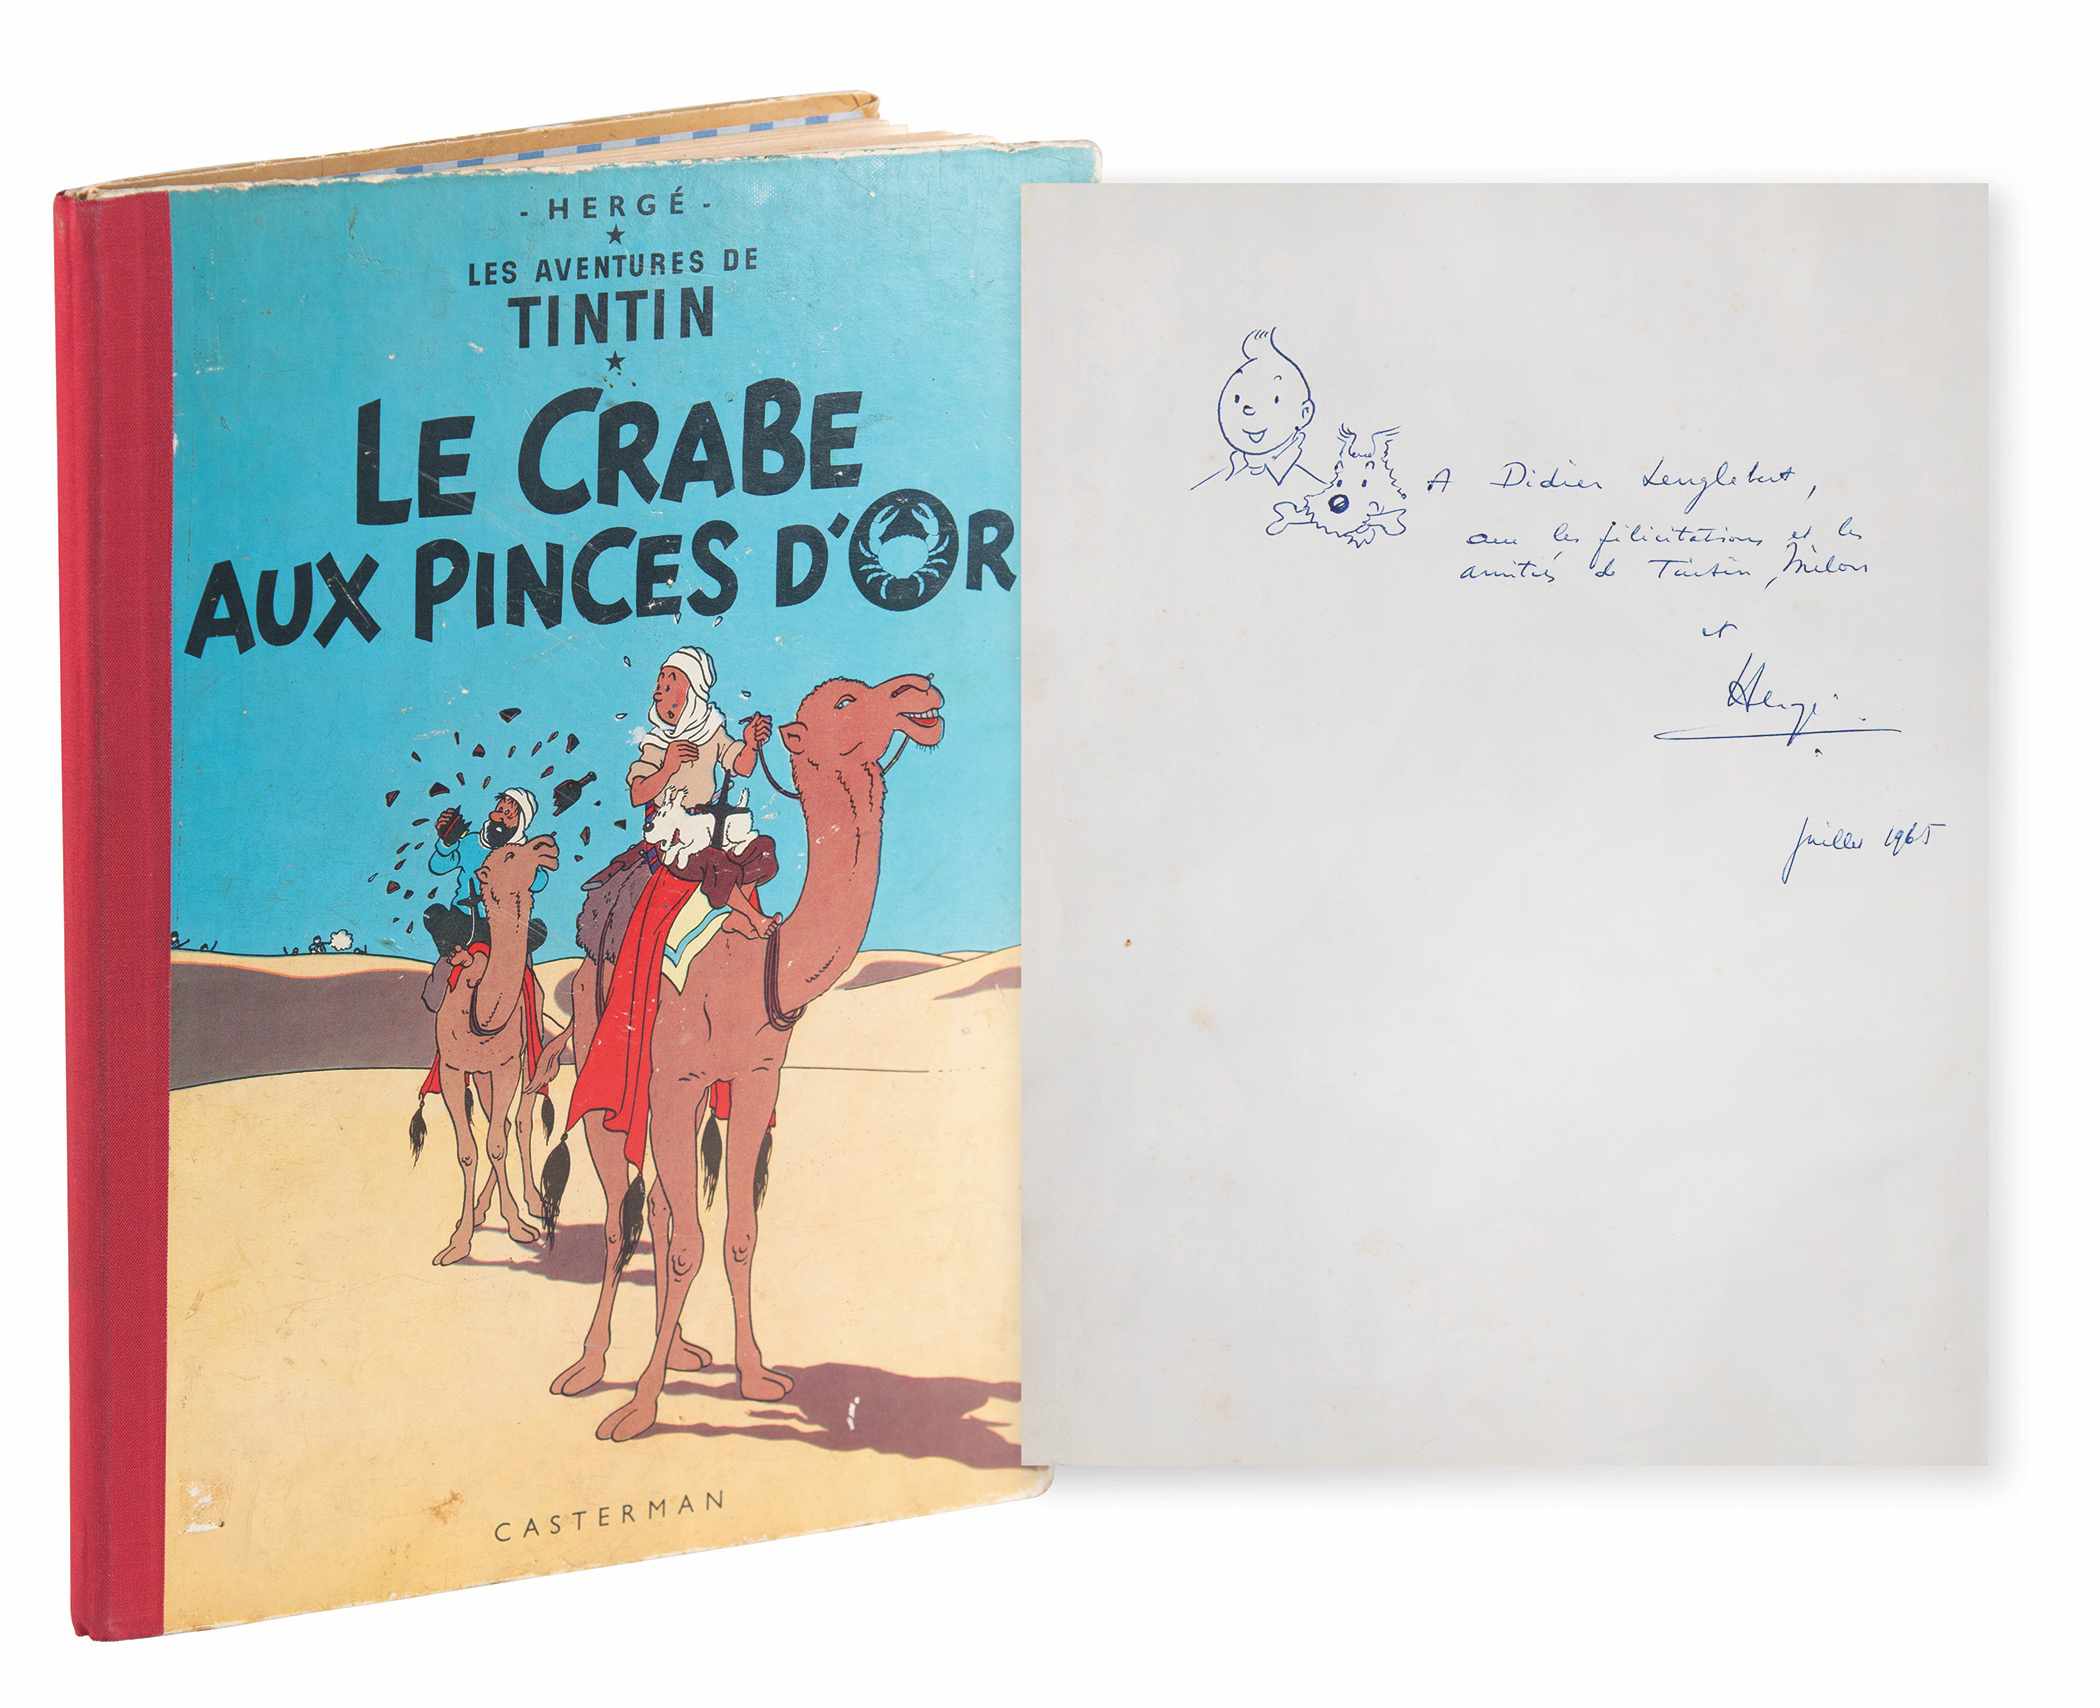 Lot #335 Herge Signed Book with Sketch of Tintin and Snowy - The Crab with the Golden Claws - Image 1